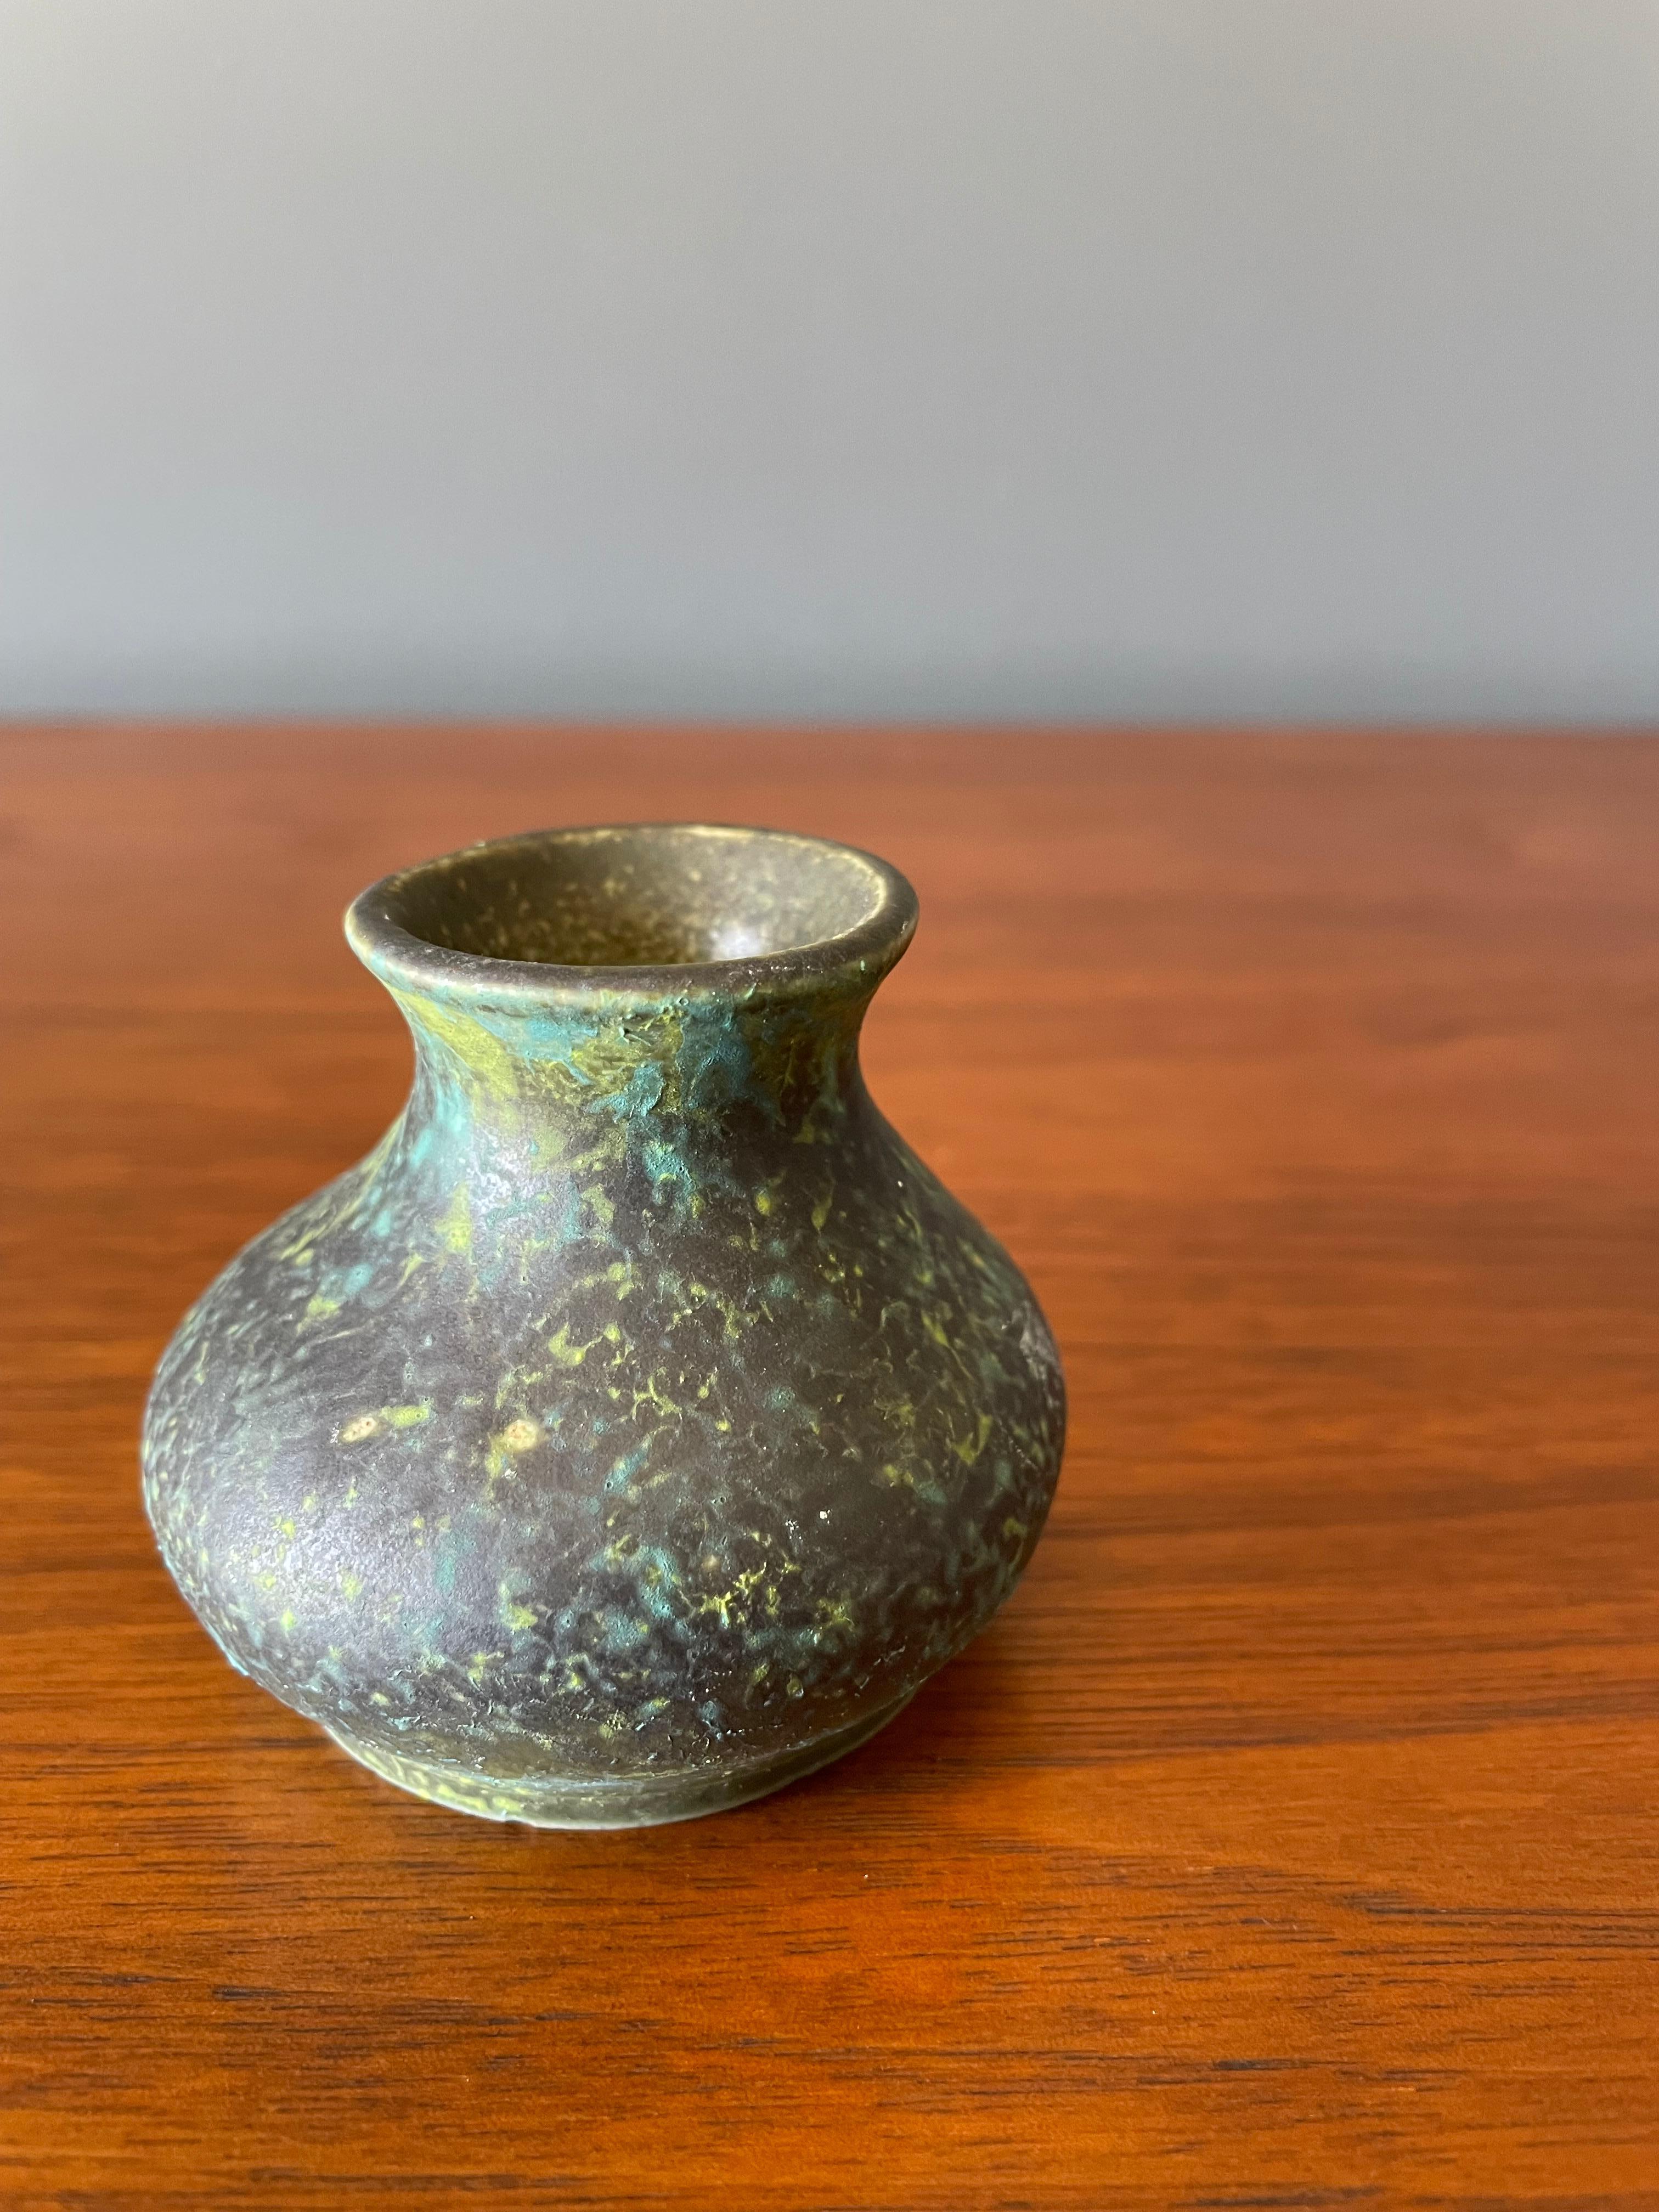 Vintage bud vase. Extra small in stature. Finished in a matte green speckled glaze.